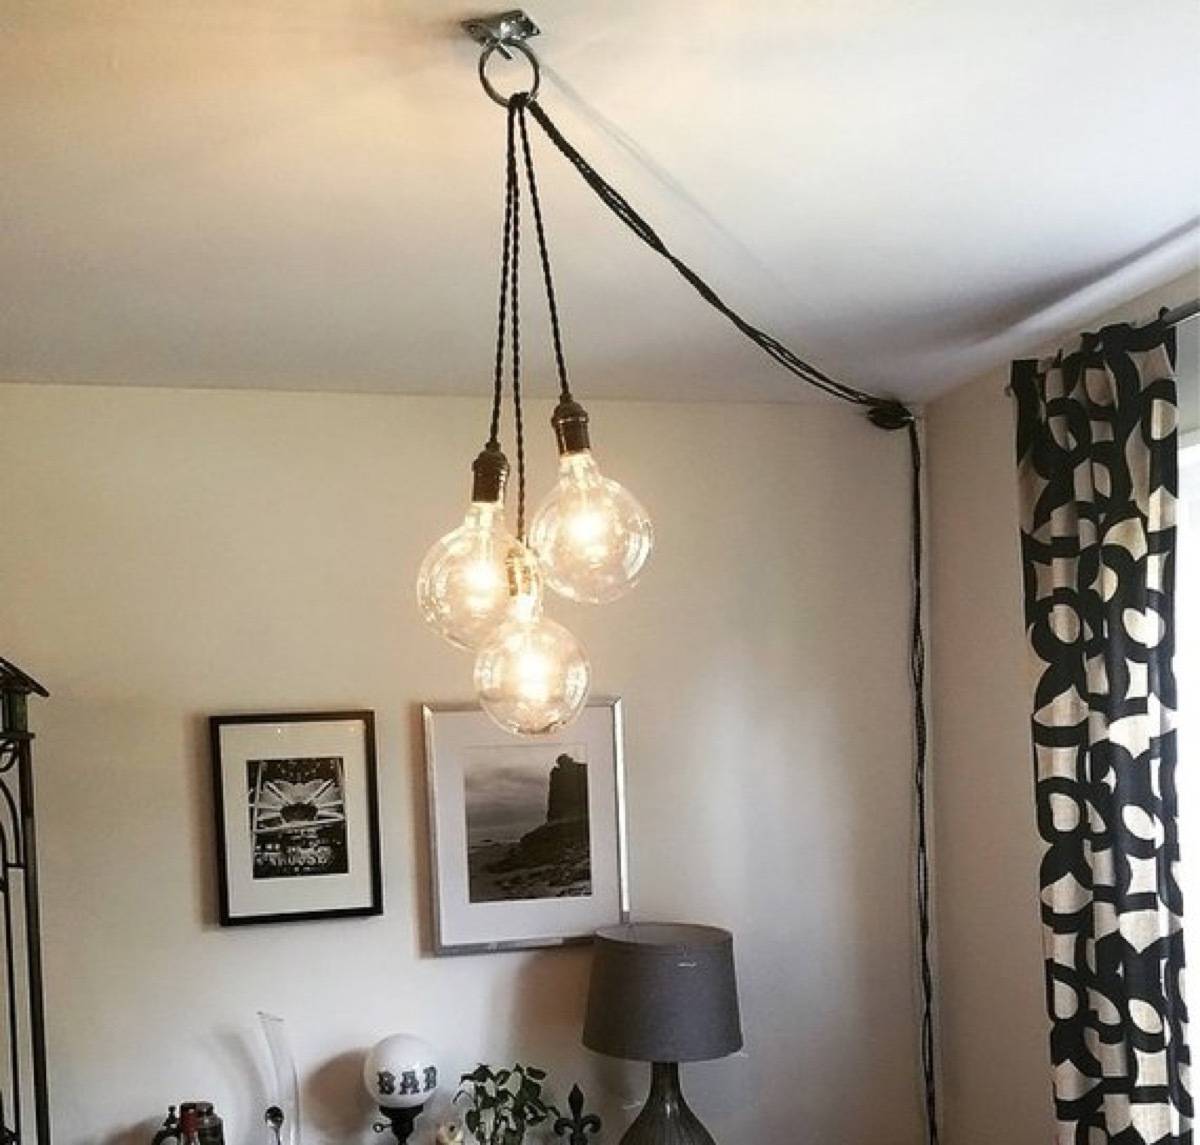 Group of hanging lights that plug directly into wall